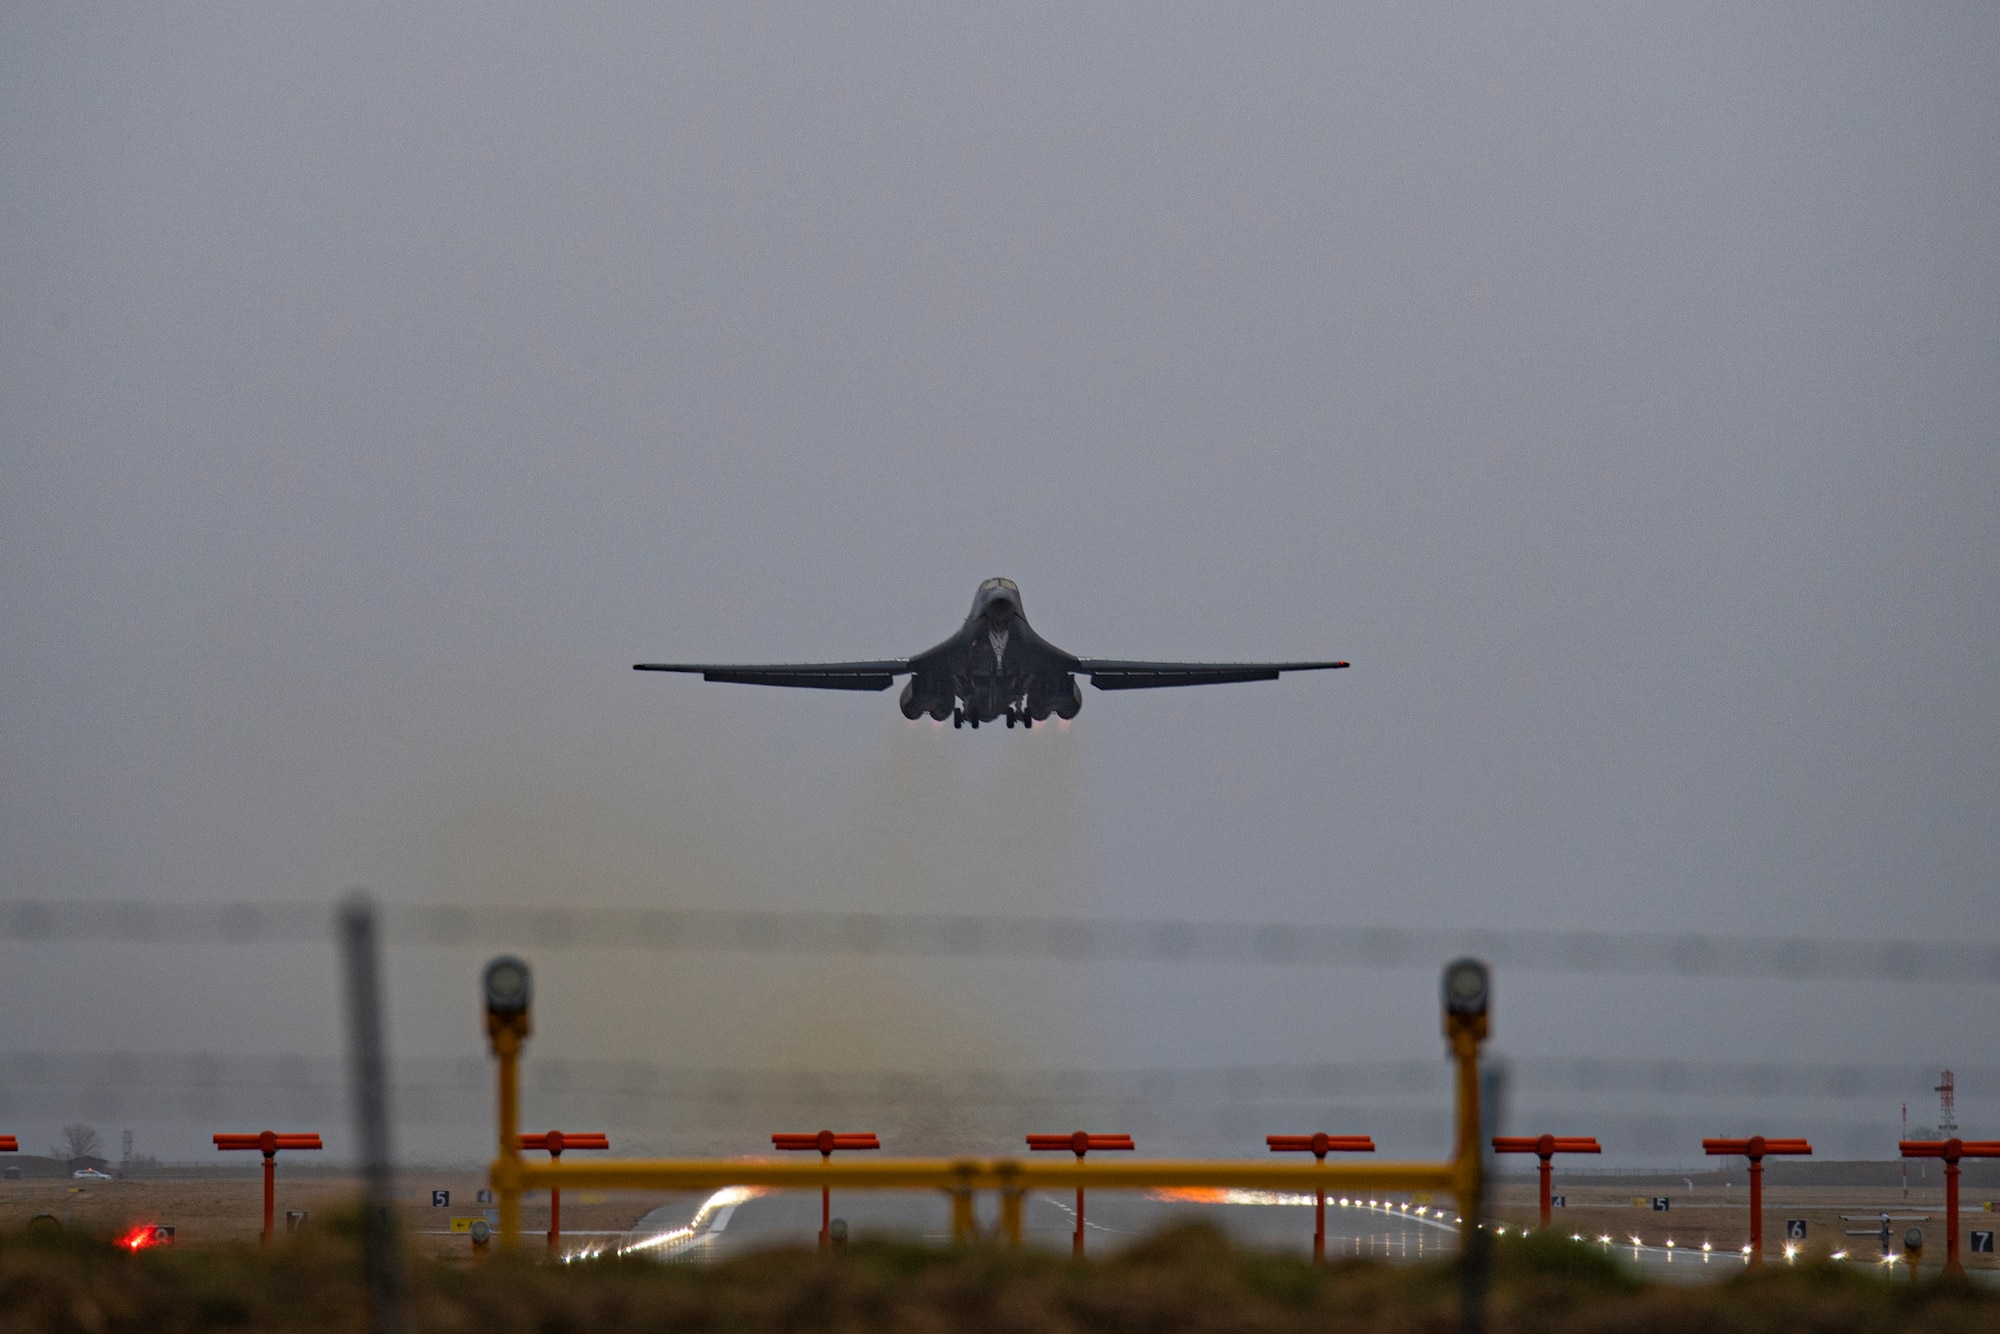 A B-1B Lancer assigned to the 9th Expeditionary Bomb Squadron takes off from Ørland Air Force Station, Norway, March 3, 2021. Two B-1 aircraft participated in Bone Saw, an ally training mission where aircrew integrated with Danish and Polish F-16 Fighting Falcons, as well as Italian and German NATO Baltic Air Police Eurofighter Typhoon aircraft. (U.S. Air Force photo by Airman 1st Class Colin Hollowell)